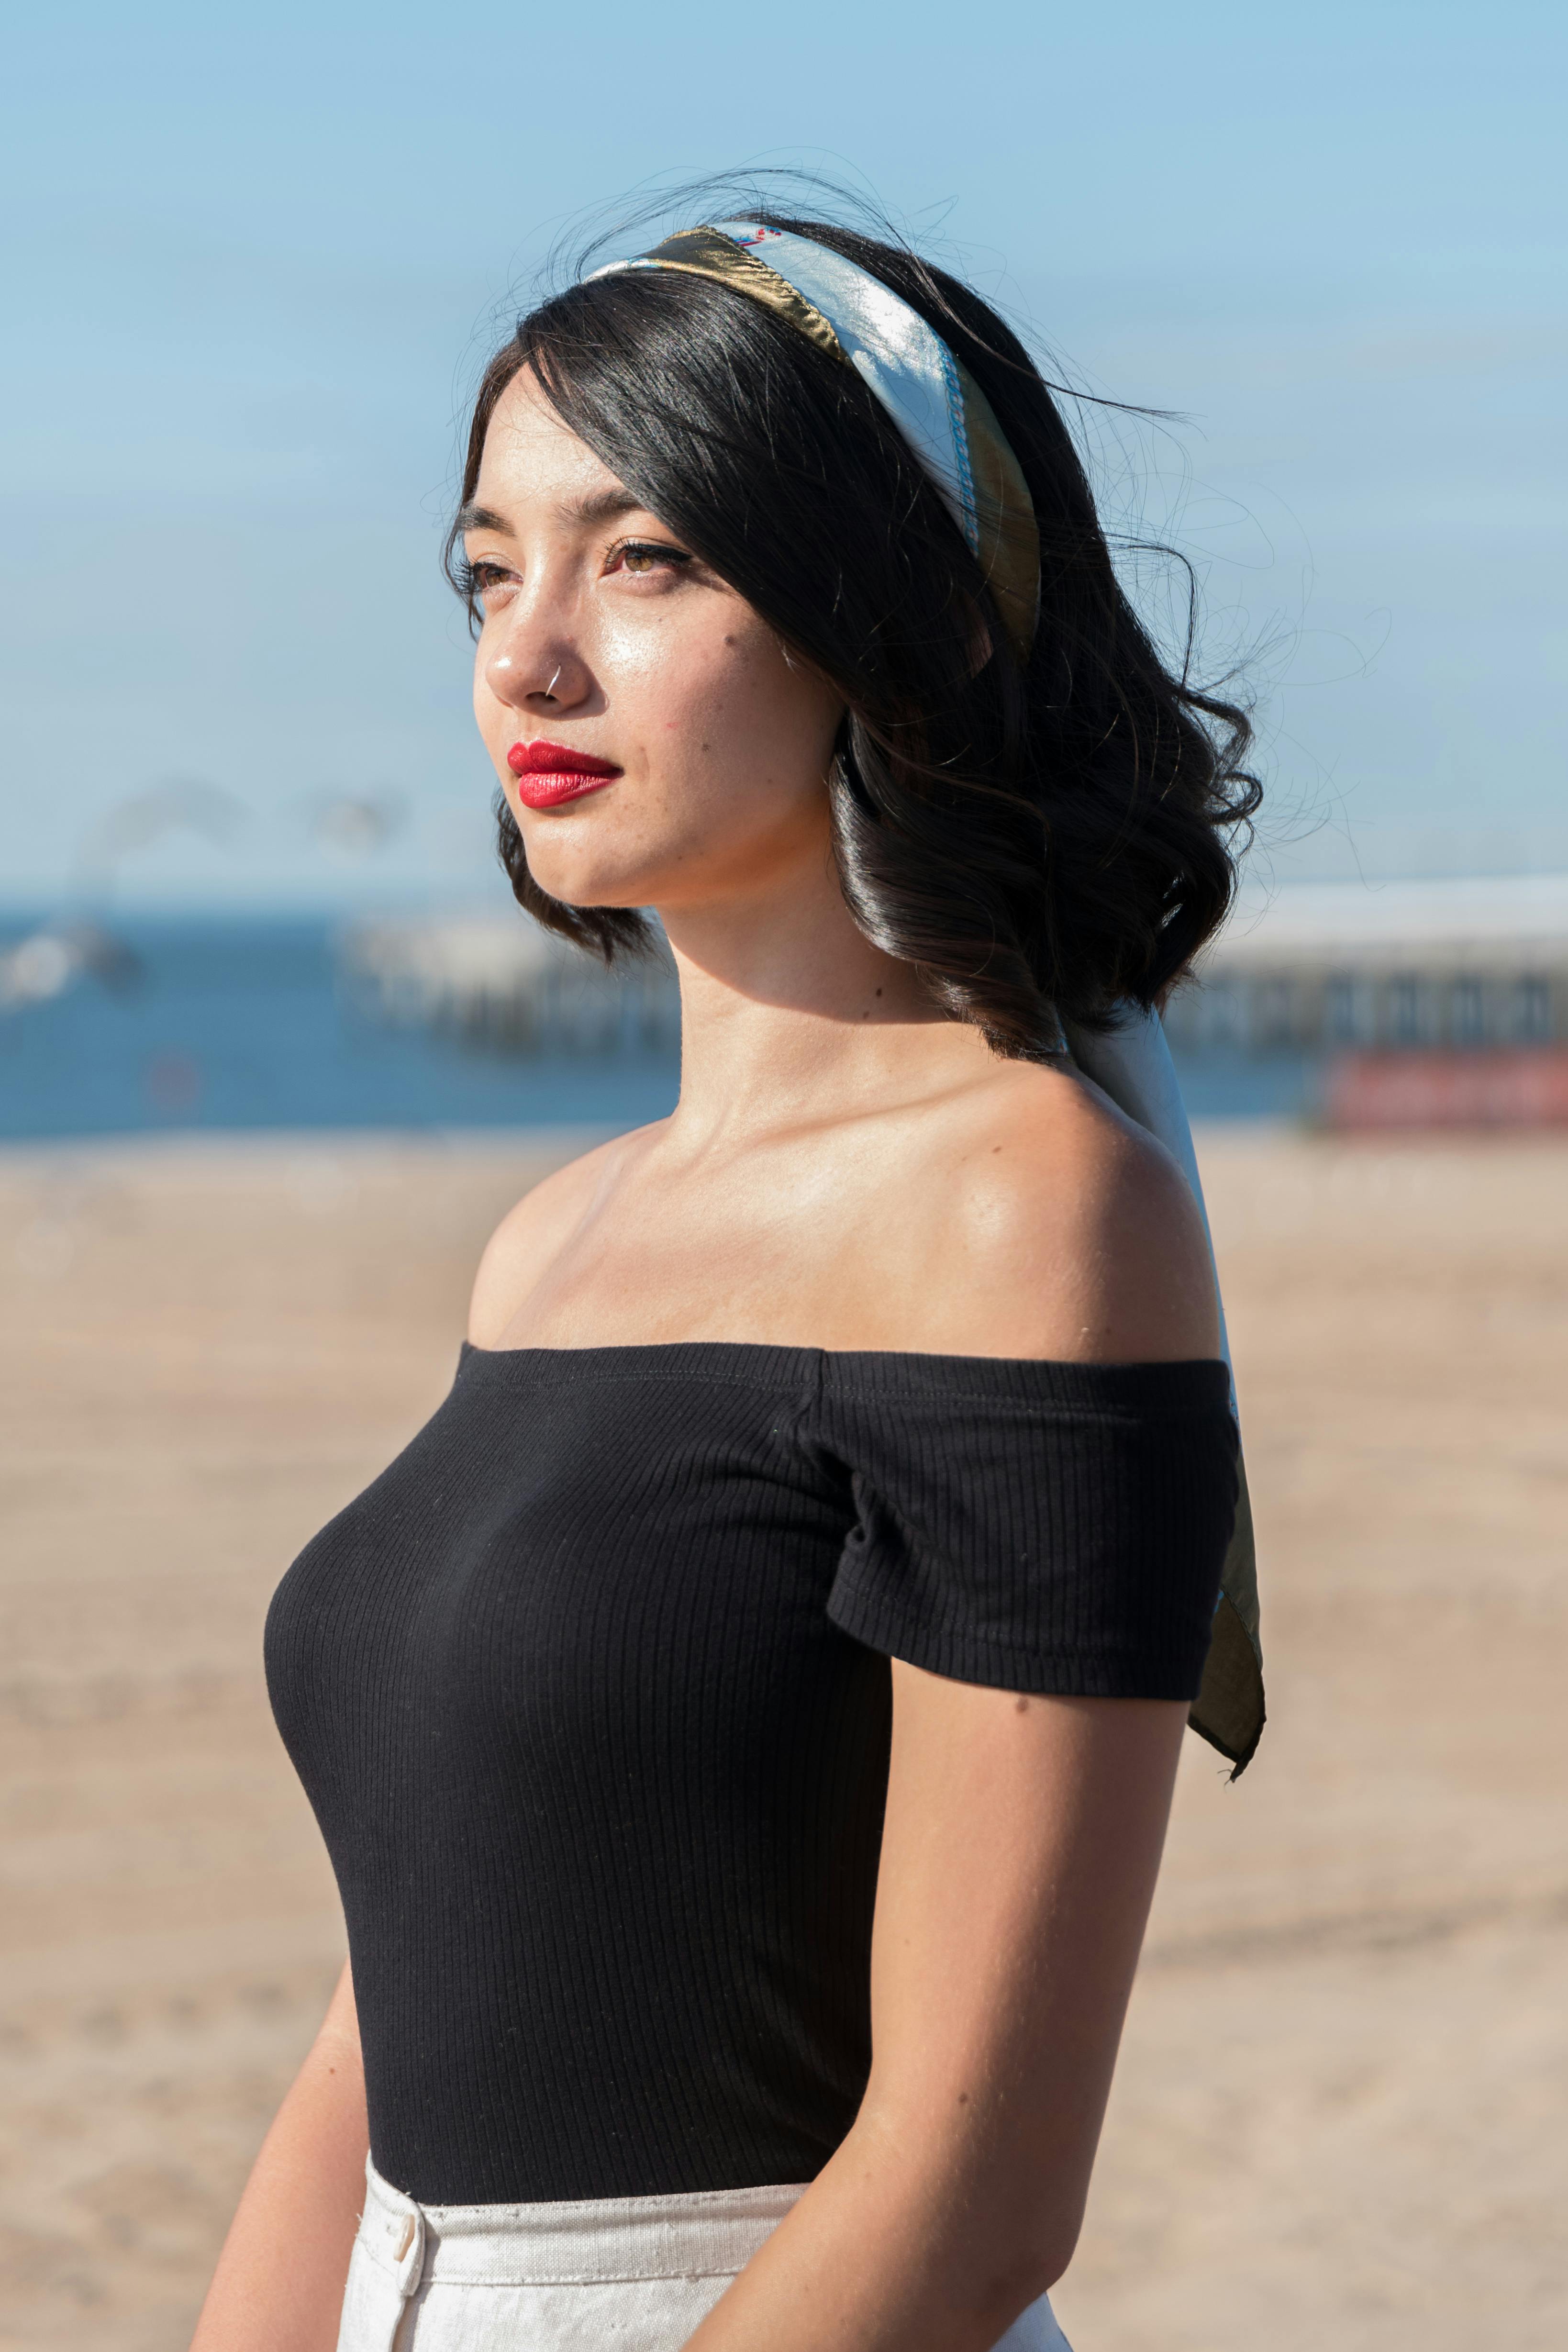 Photo Of Woman Wearing Black Off Shoulders · Free Stock Photo